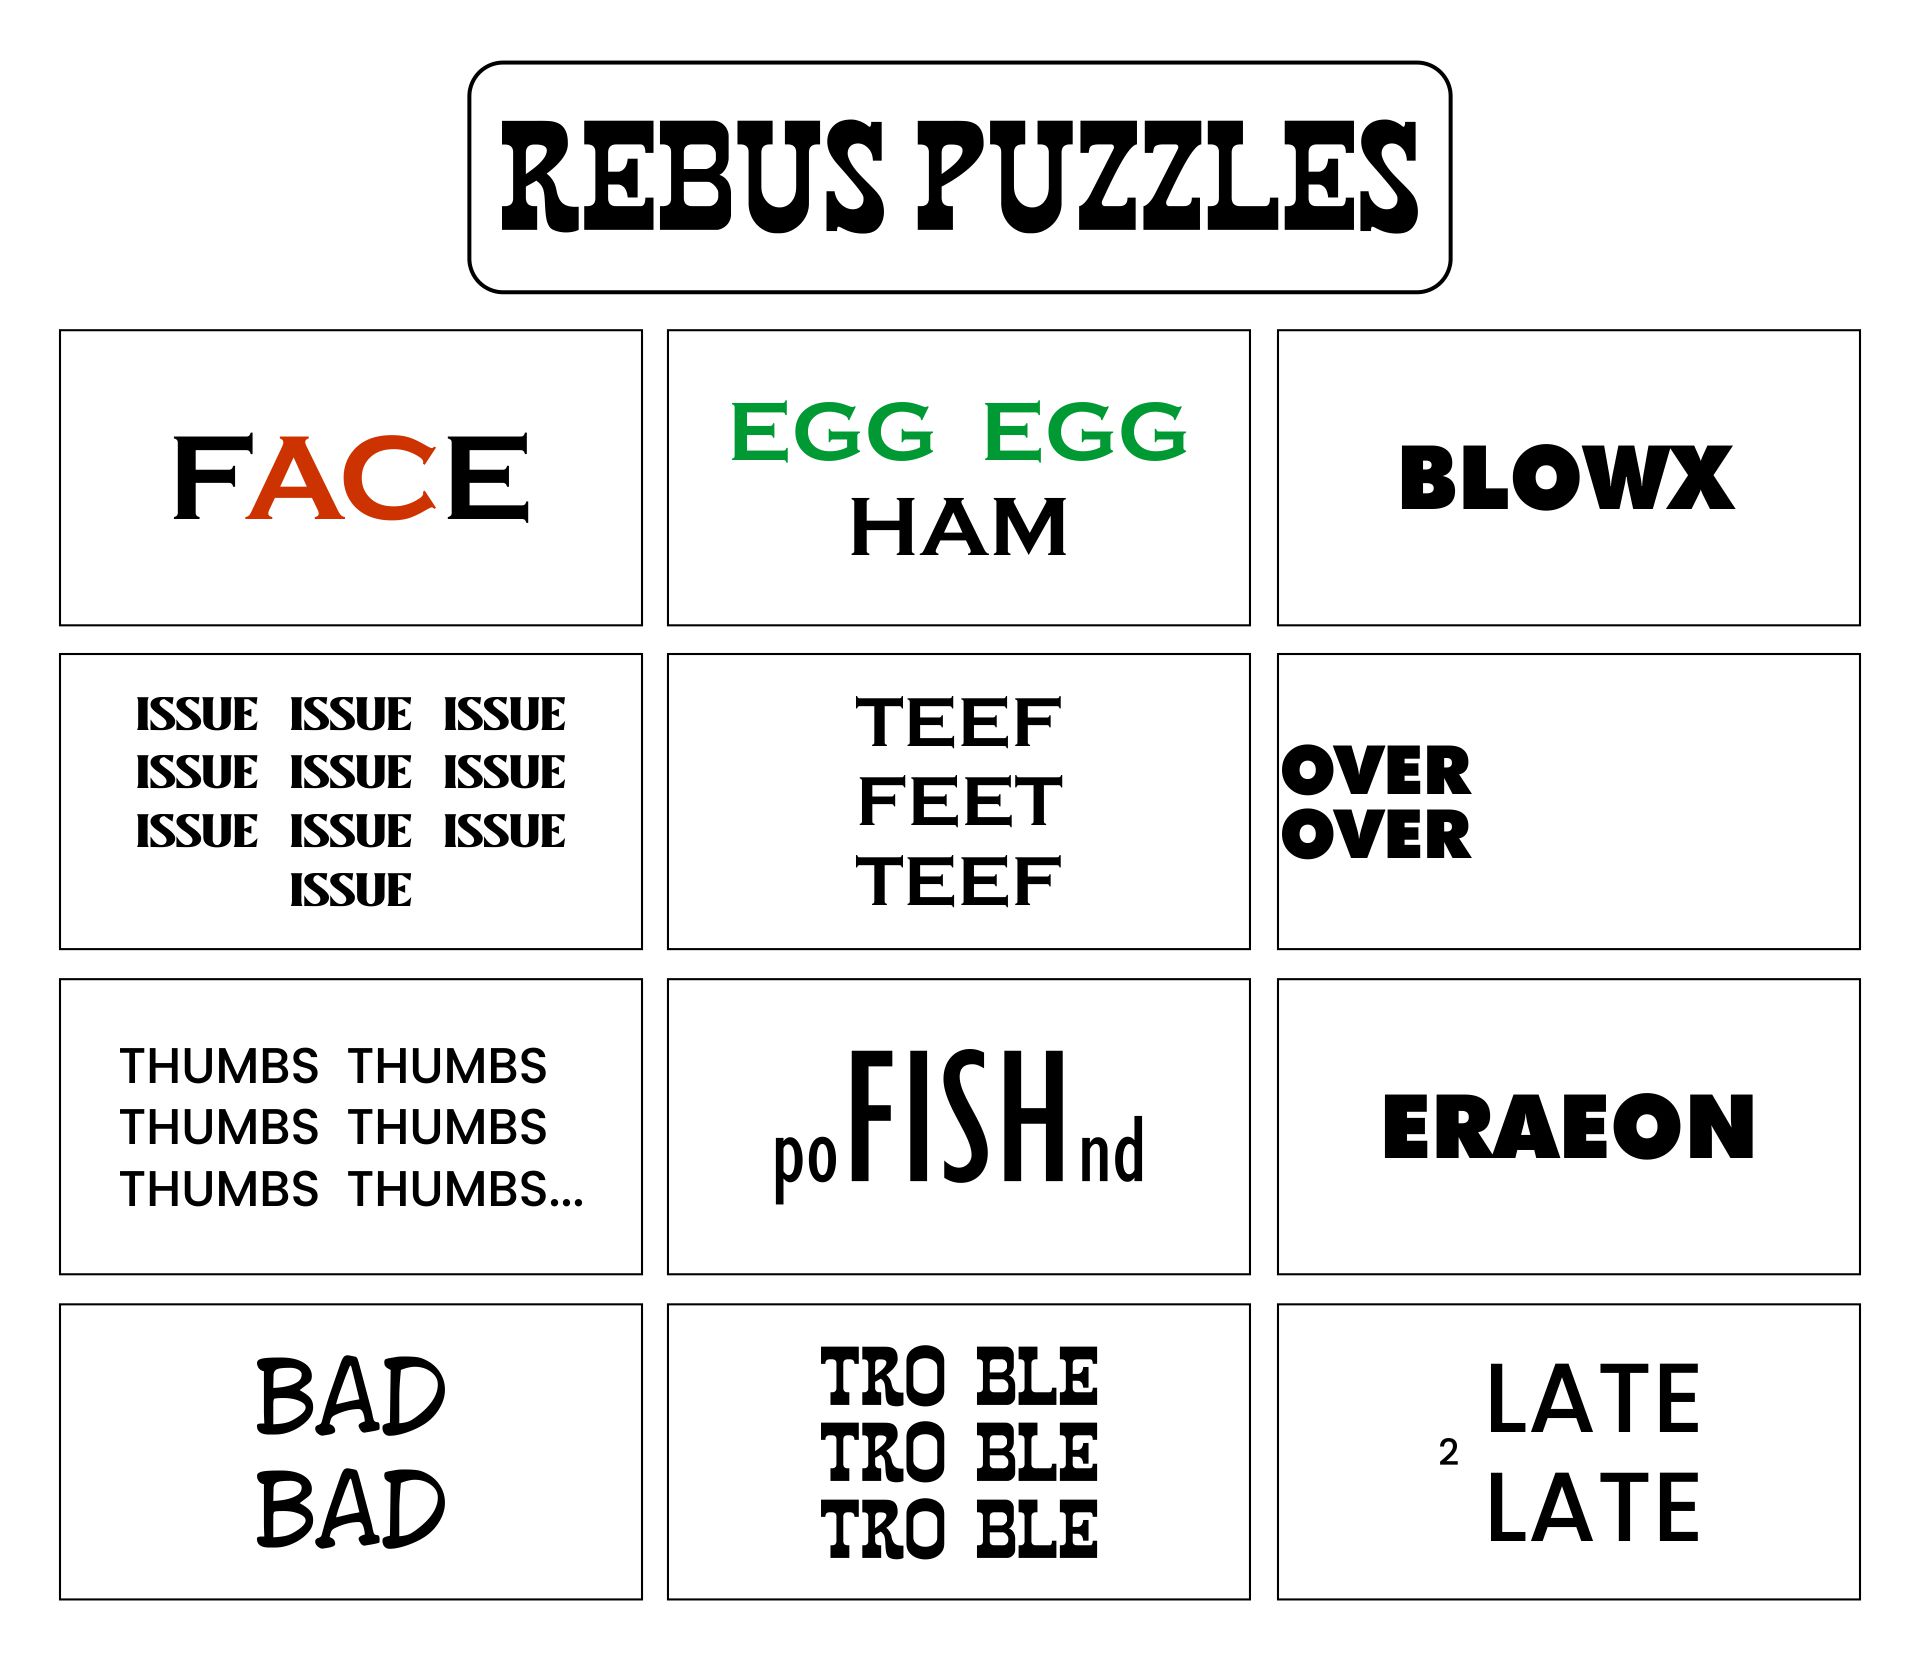 rebus puzzles funny funny words words words words answer